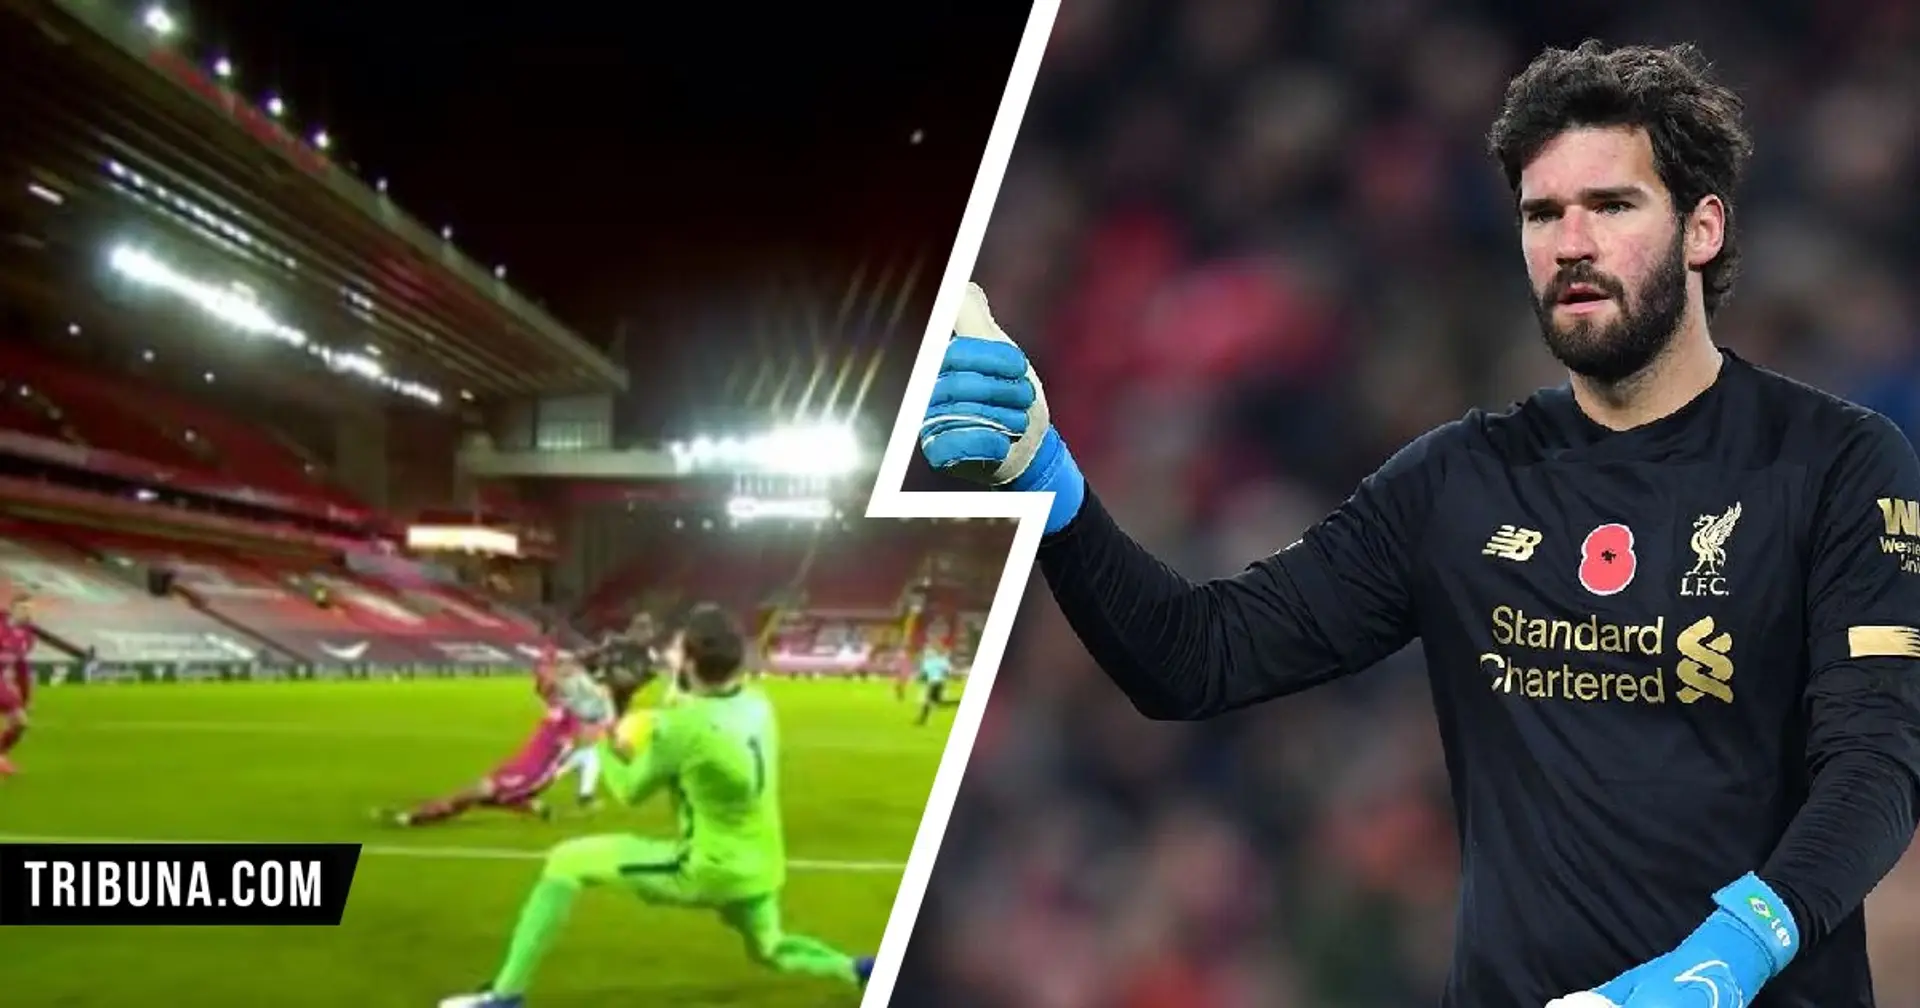 Goalkeeping expert explains why Alisson makes difficult saves look easy after Man United masterclass